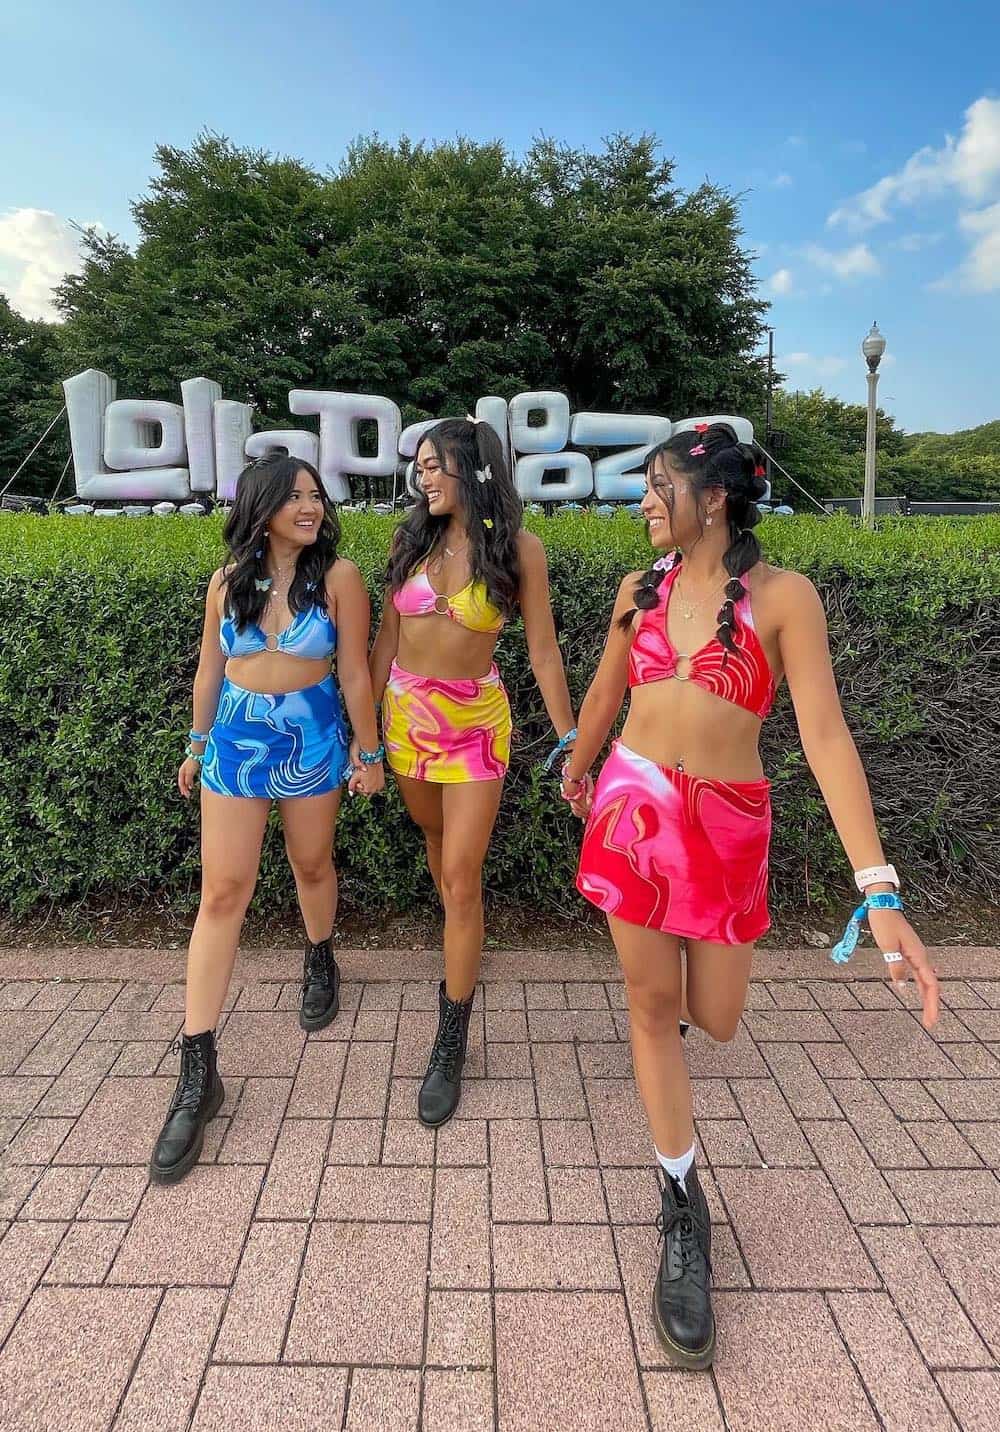 Three girls wearing matching red, blue, and yellow with pink tie-dye sets in front of a Lollapalooza sign